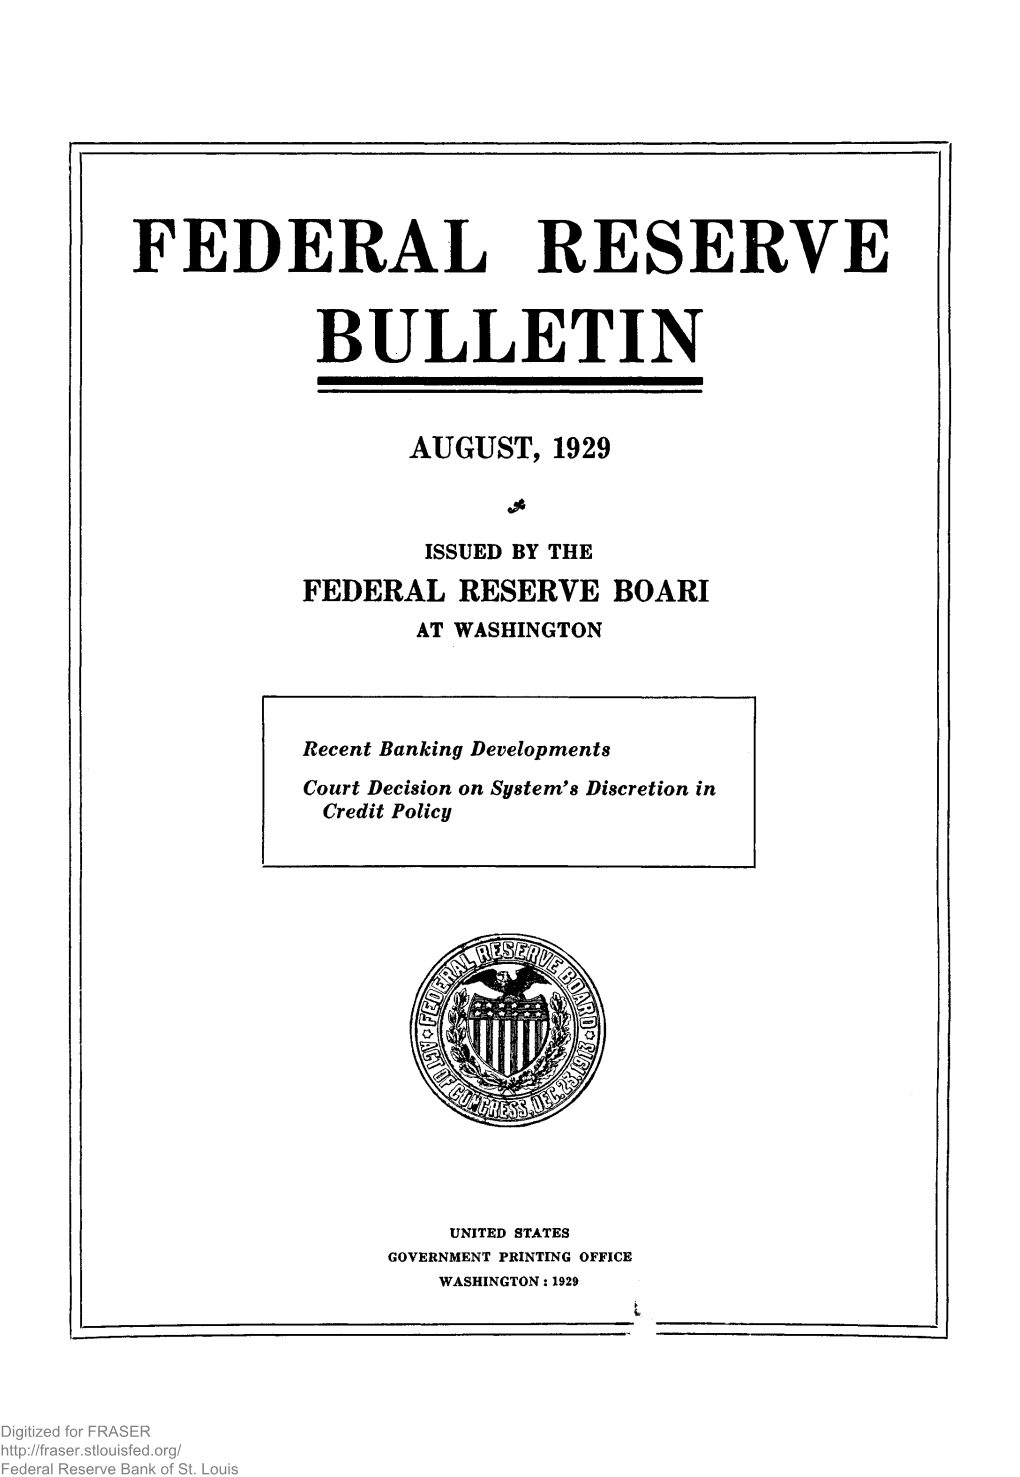 Federal Reserve Bulletin August 1929